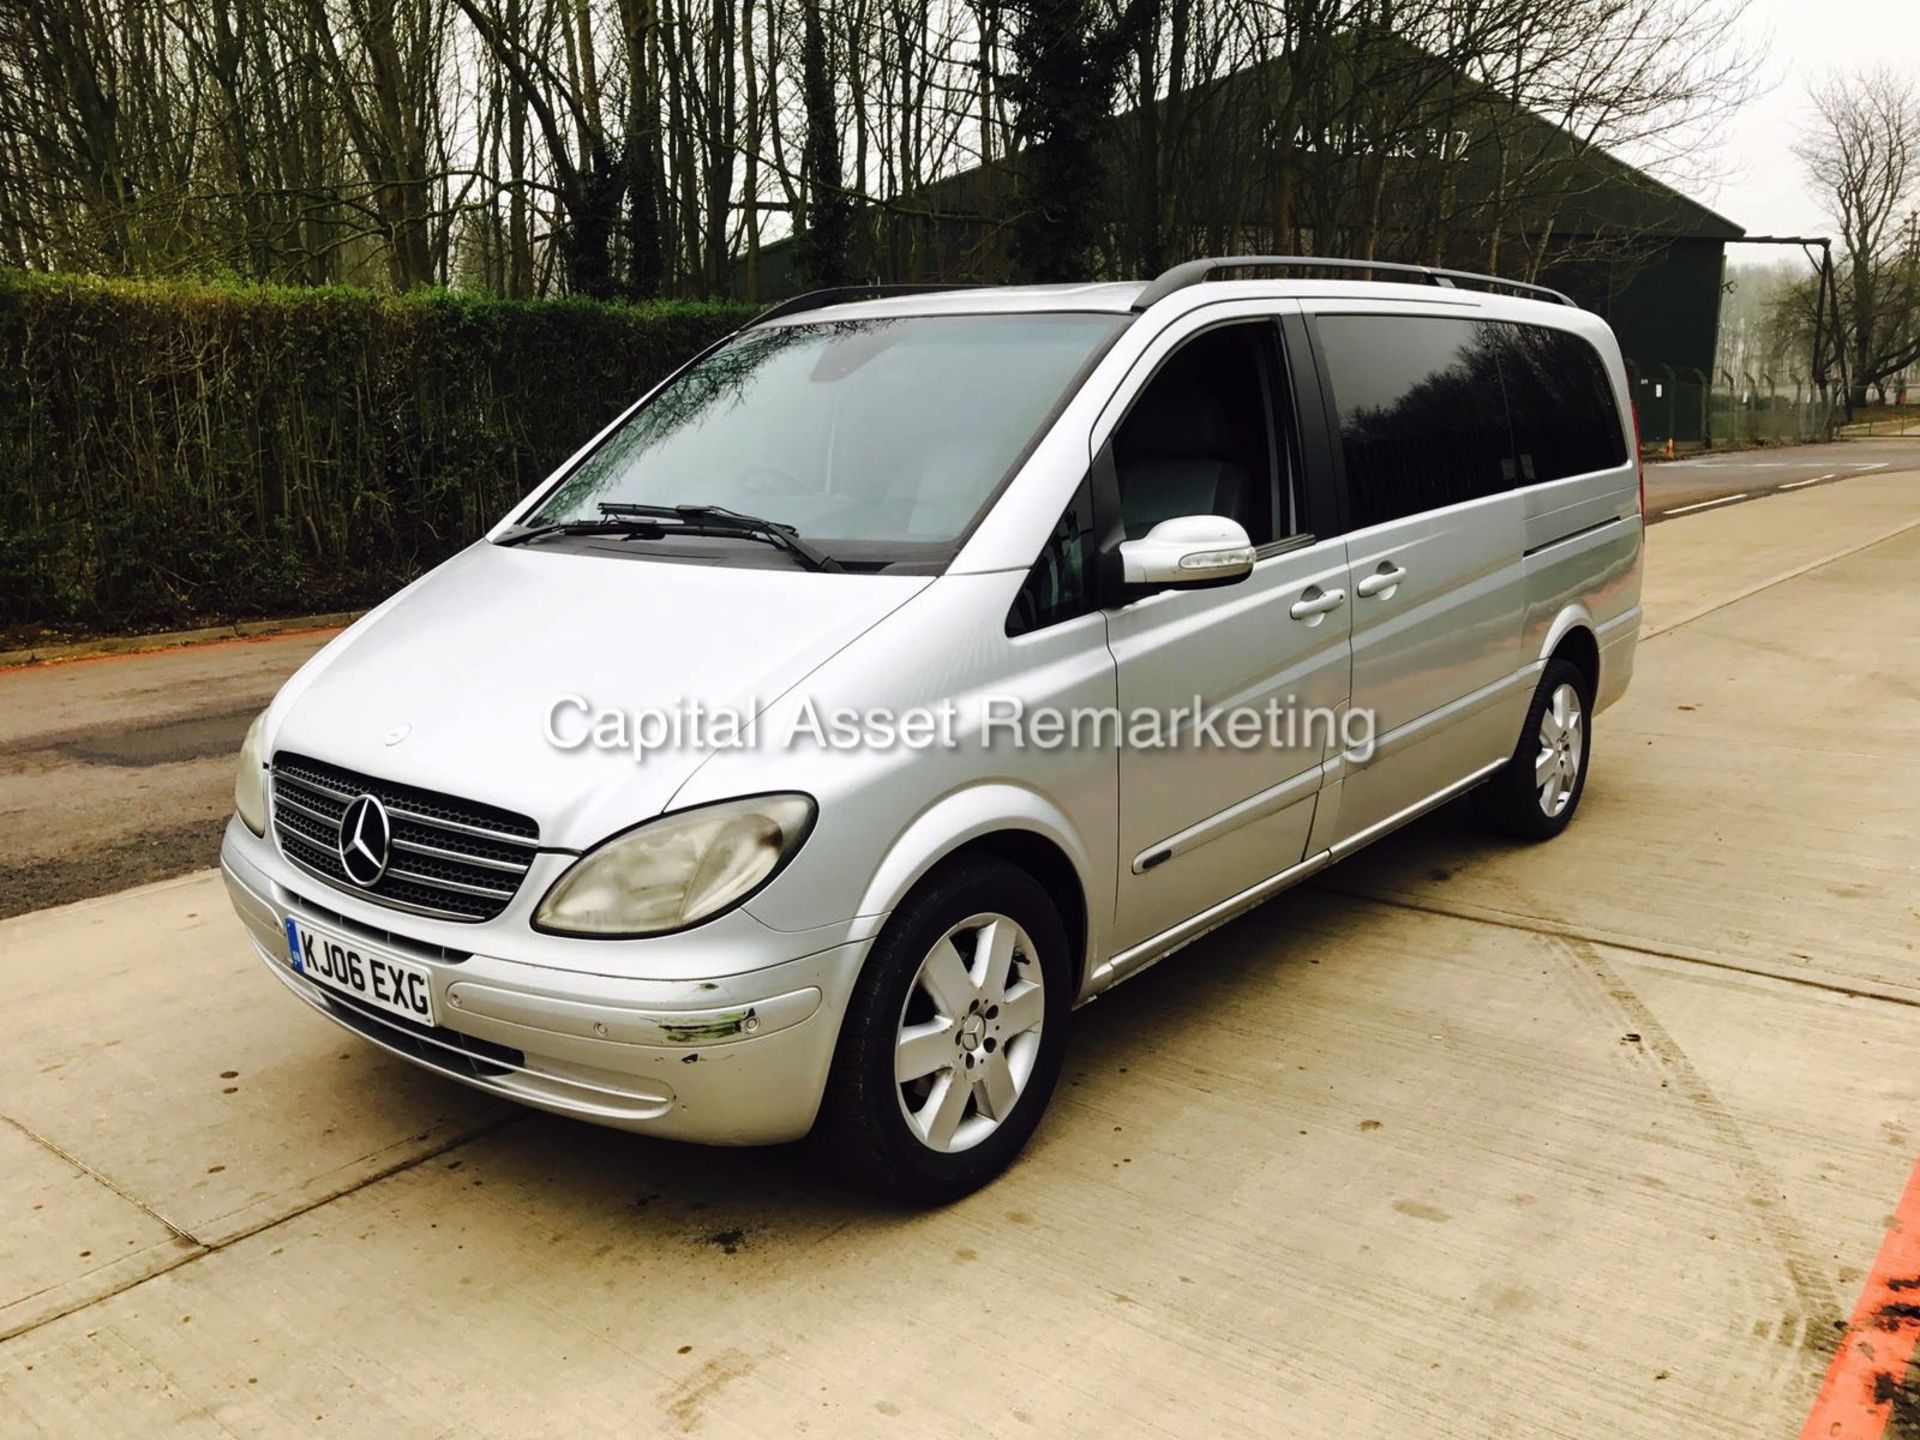 ON SALE MERCEDES VIANO 2.2CDI AUTO"AMBIENTE"LWB / LUXURY TRAVEL LINER - FULL LOADED-SAT NAV -LEATHER - Image 3 of 14